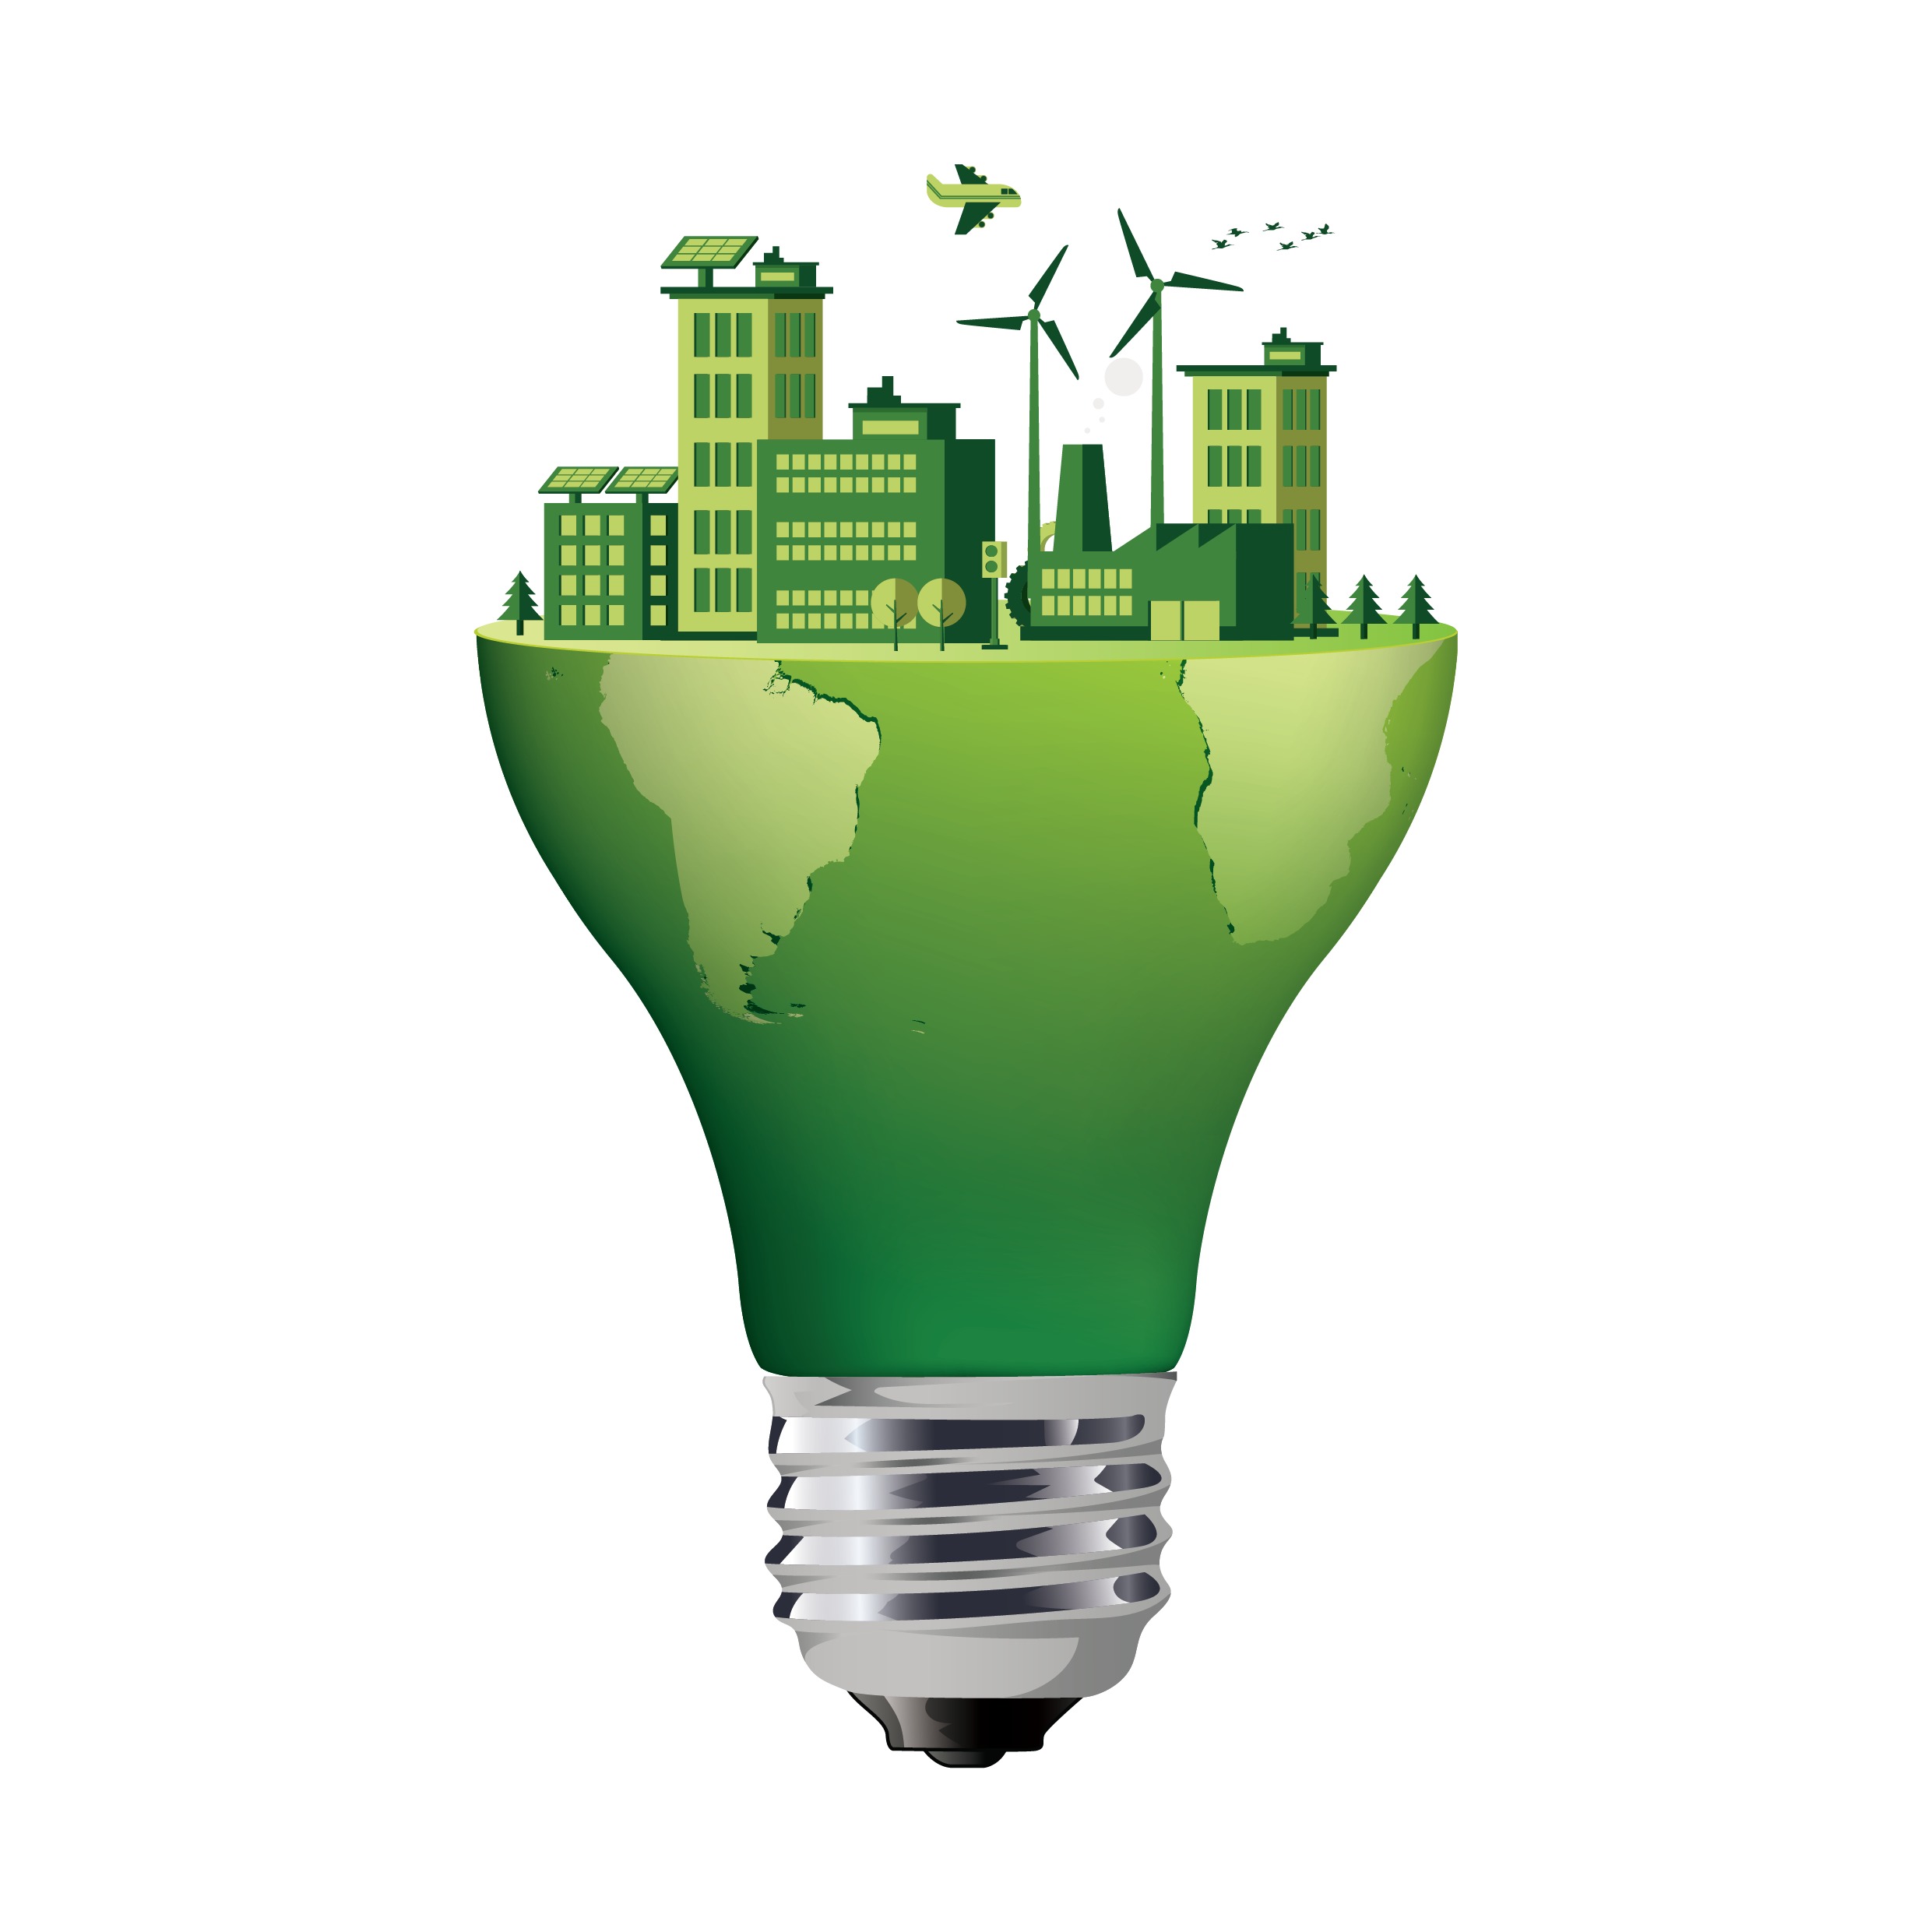 Going green can save your business money